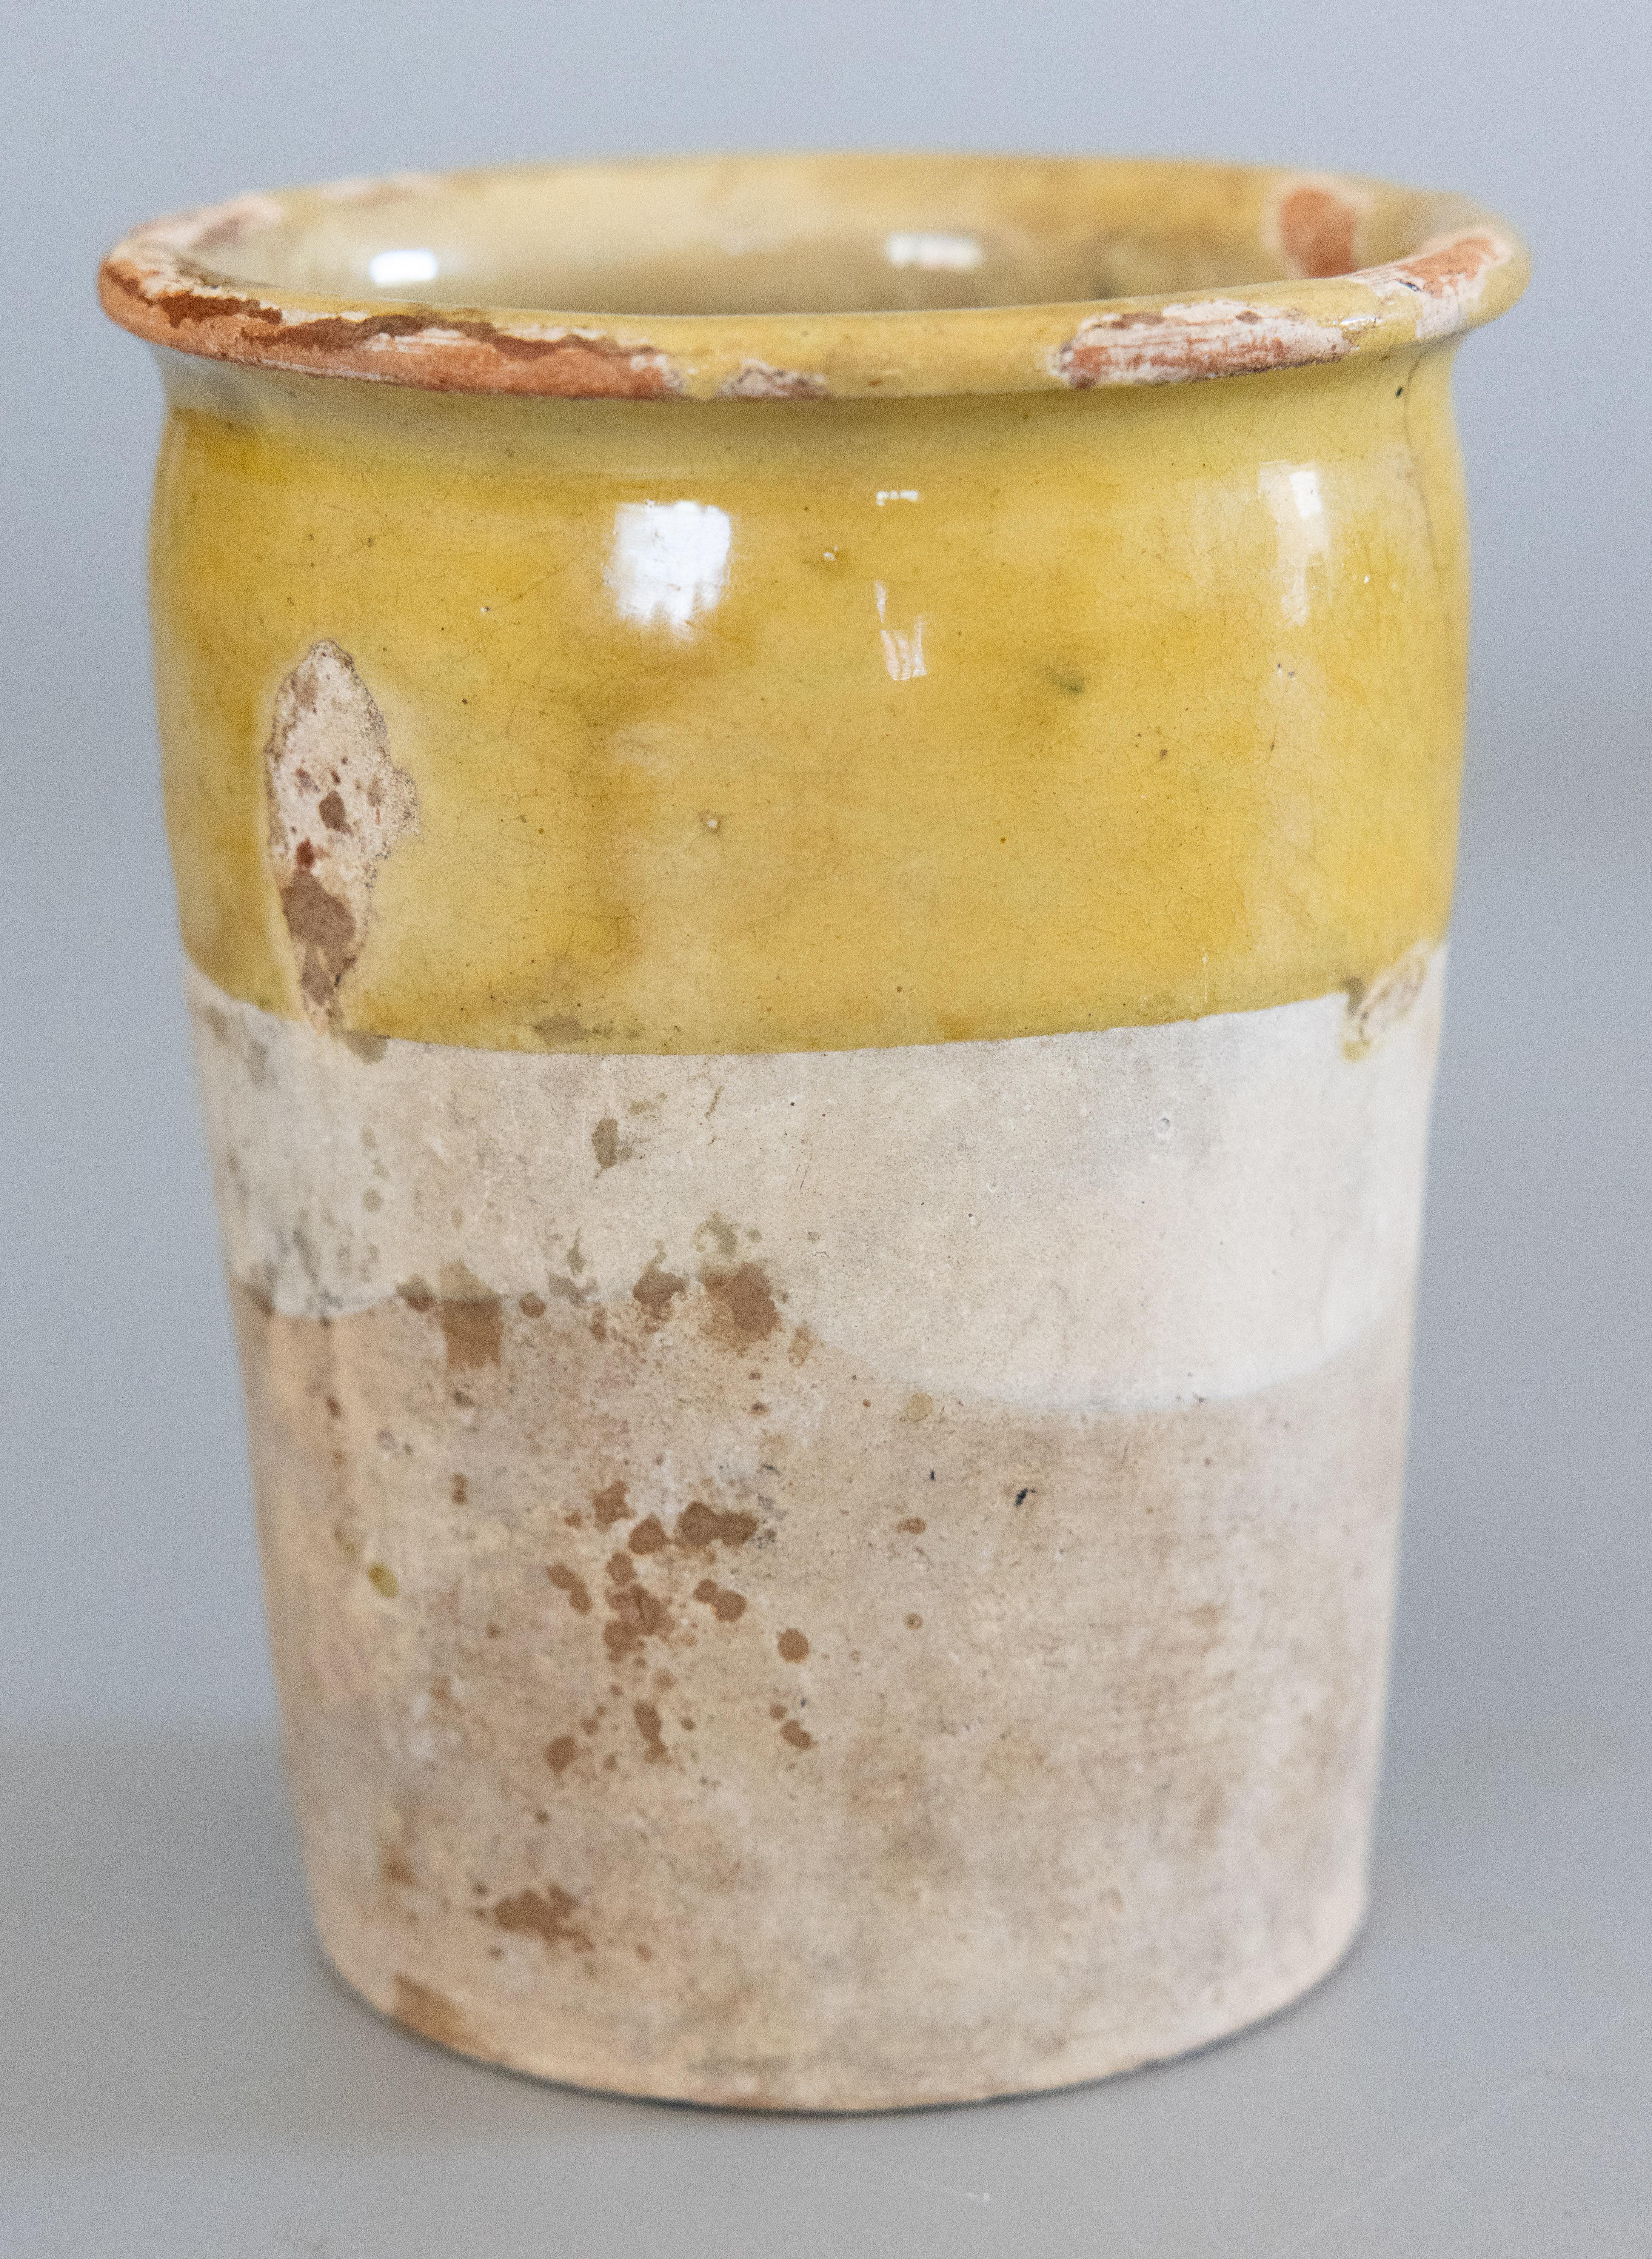 A charming 19th century French confit pot or crock with a wonderful yellow glaze. Sourced from the South of France, Castelnaudary. These jars were used for storing and preserving cooked meat, and would be beautiful today with a bouquet of flowers or